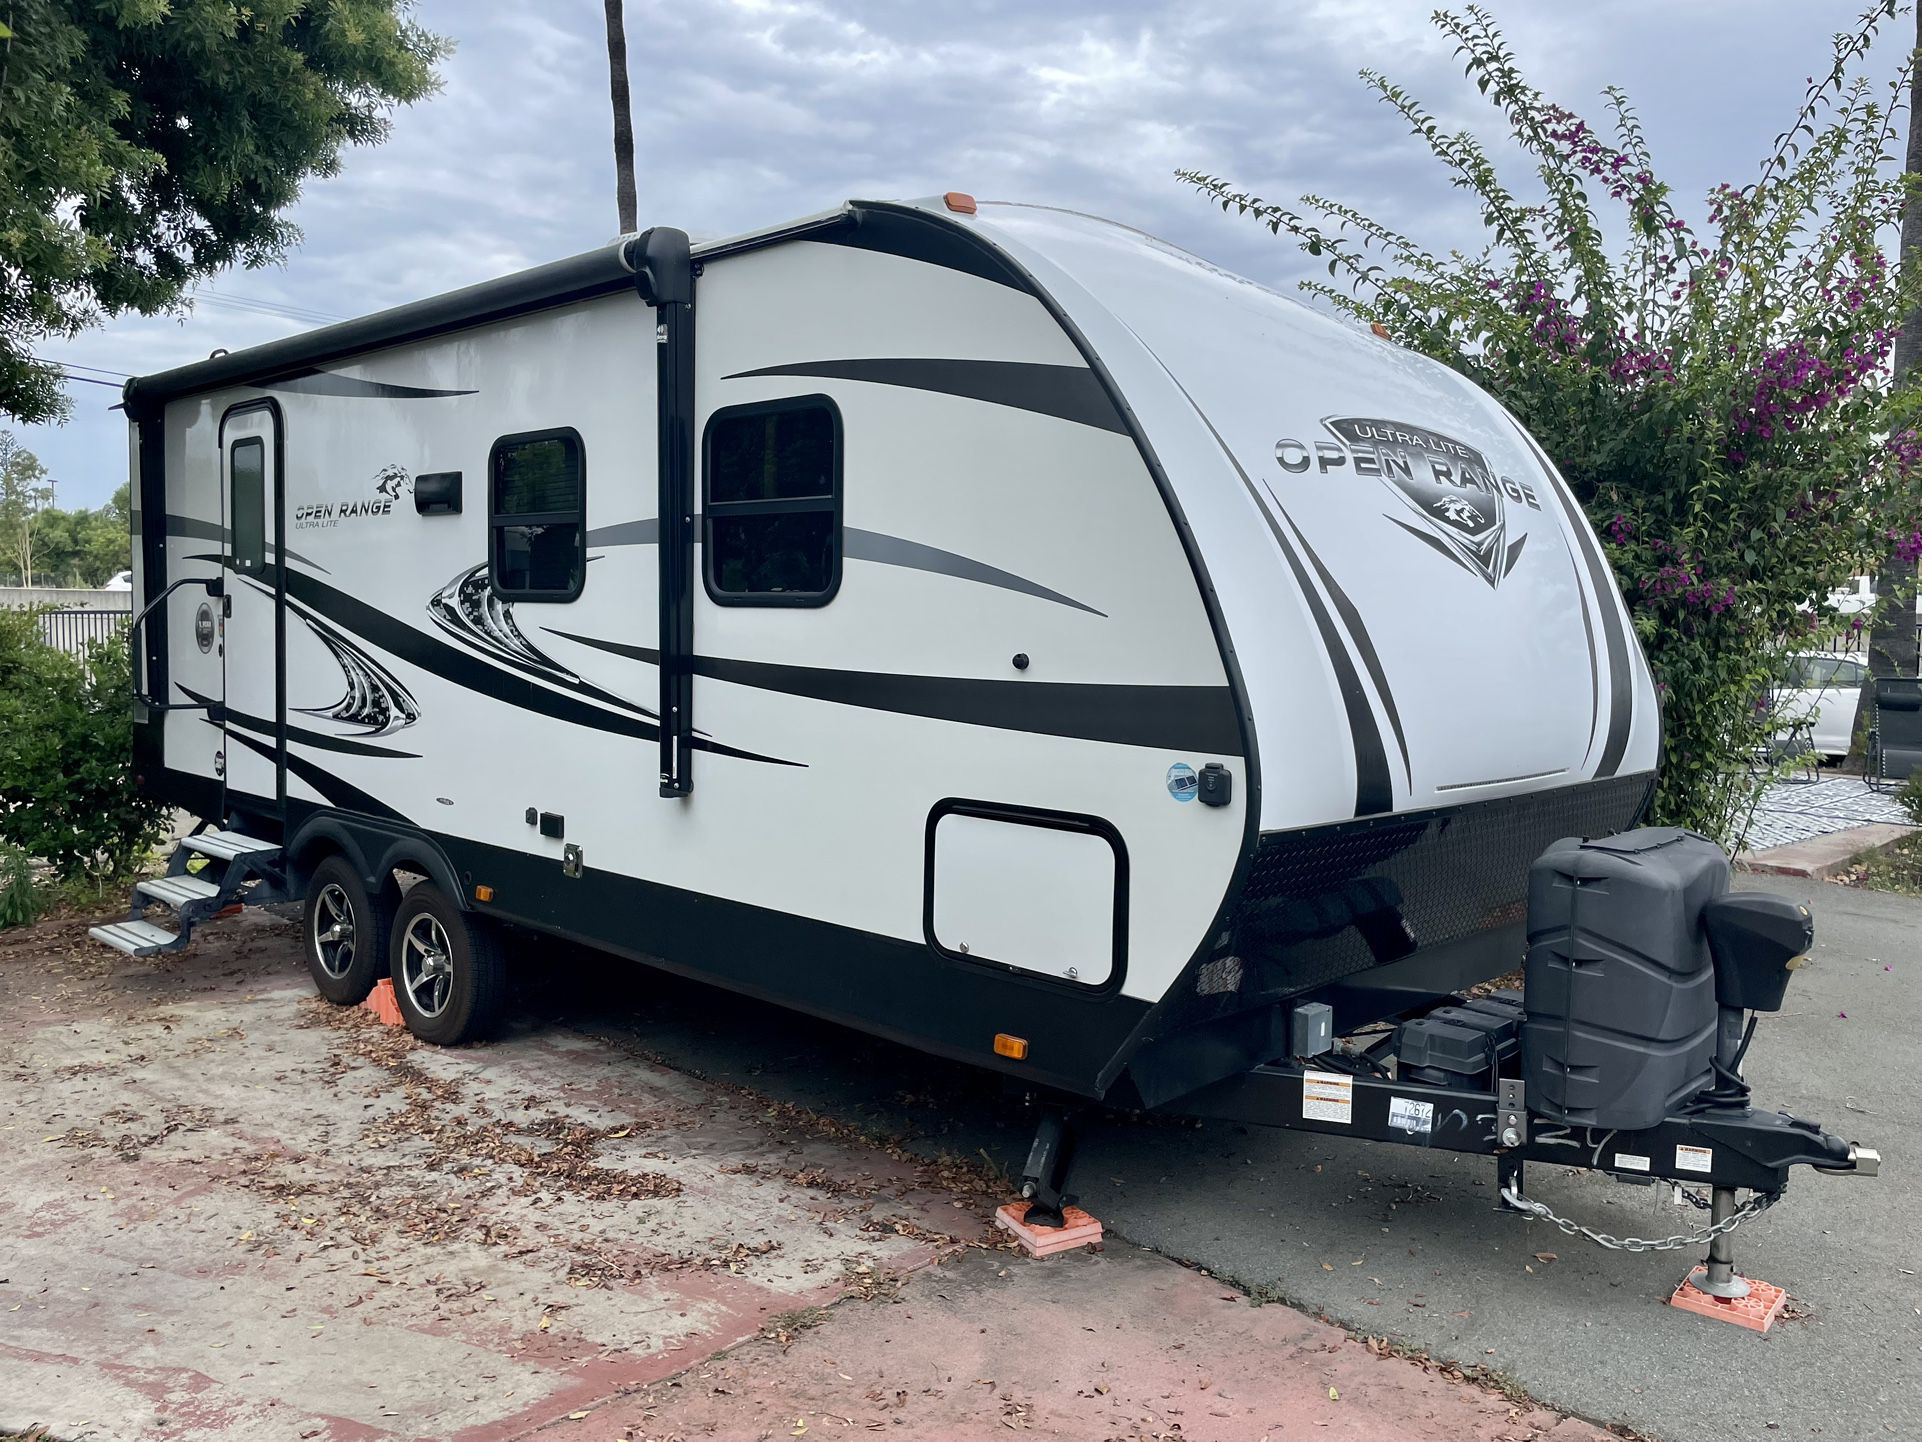 2019 Highland Open Range RB 2102 for Sale in San Diego, CA - OfferUp